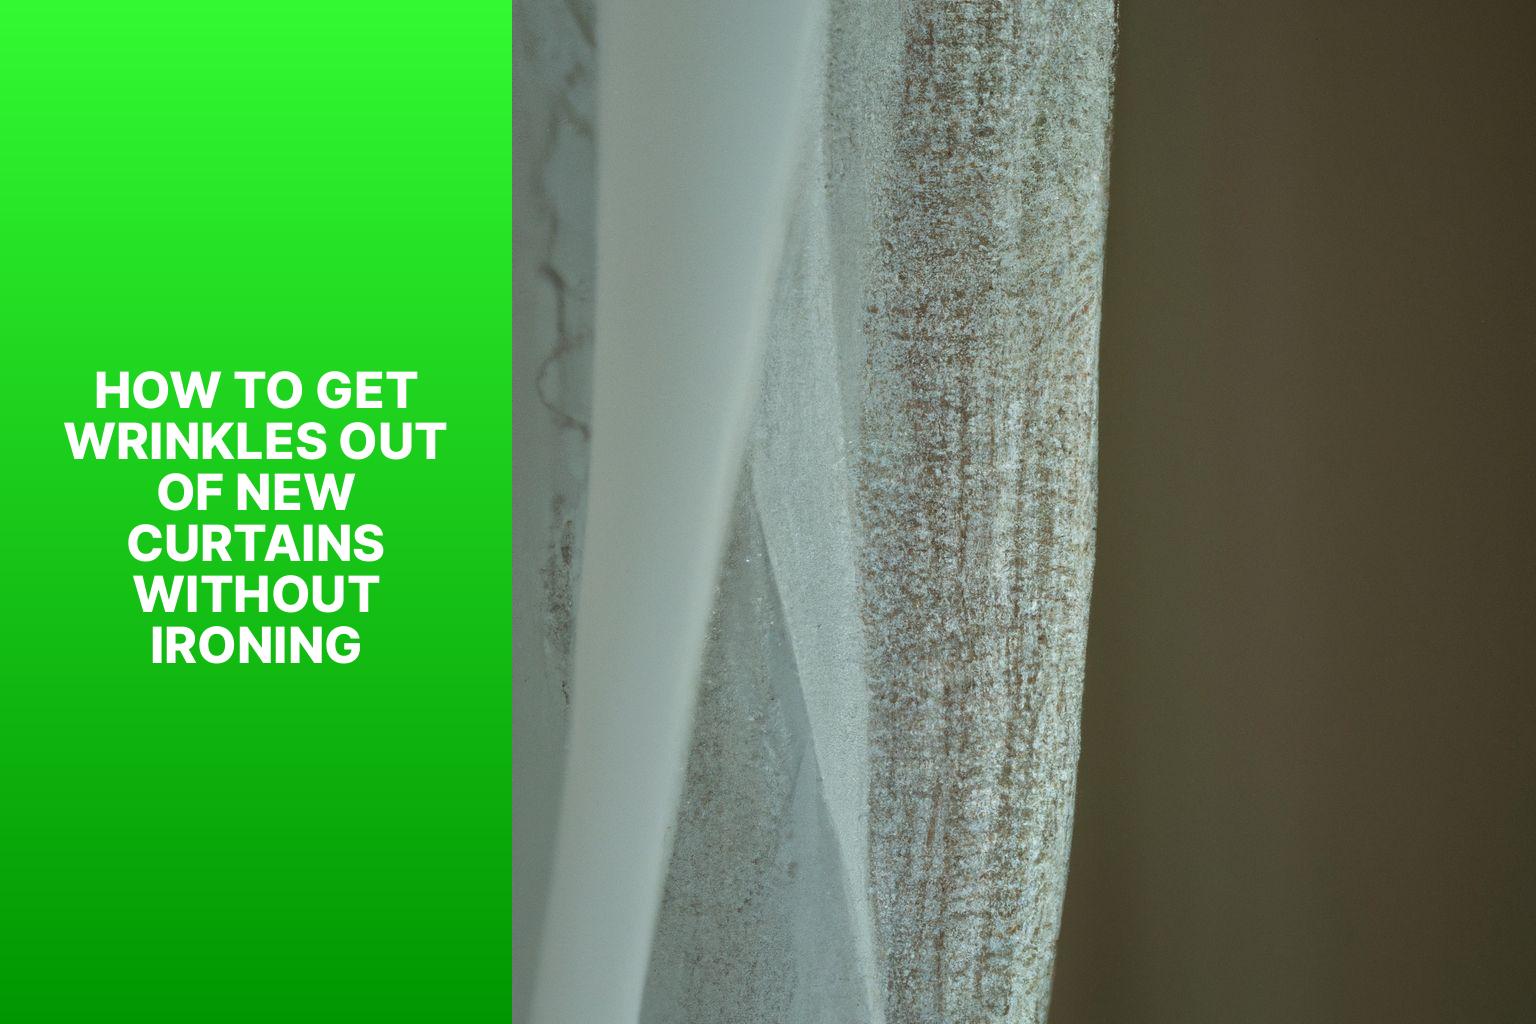 How To Get Wrinkles Out Of New Curtains Without Ironing